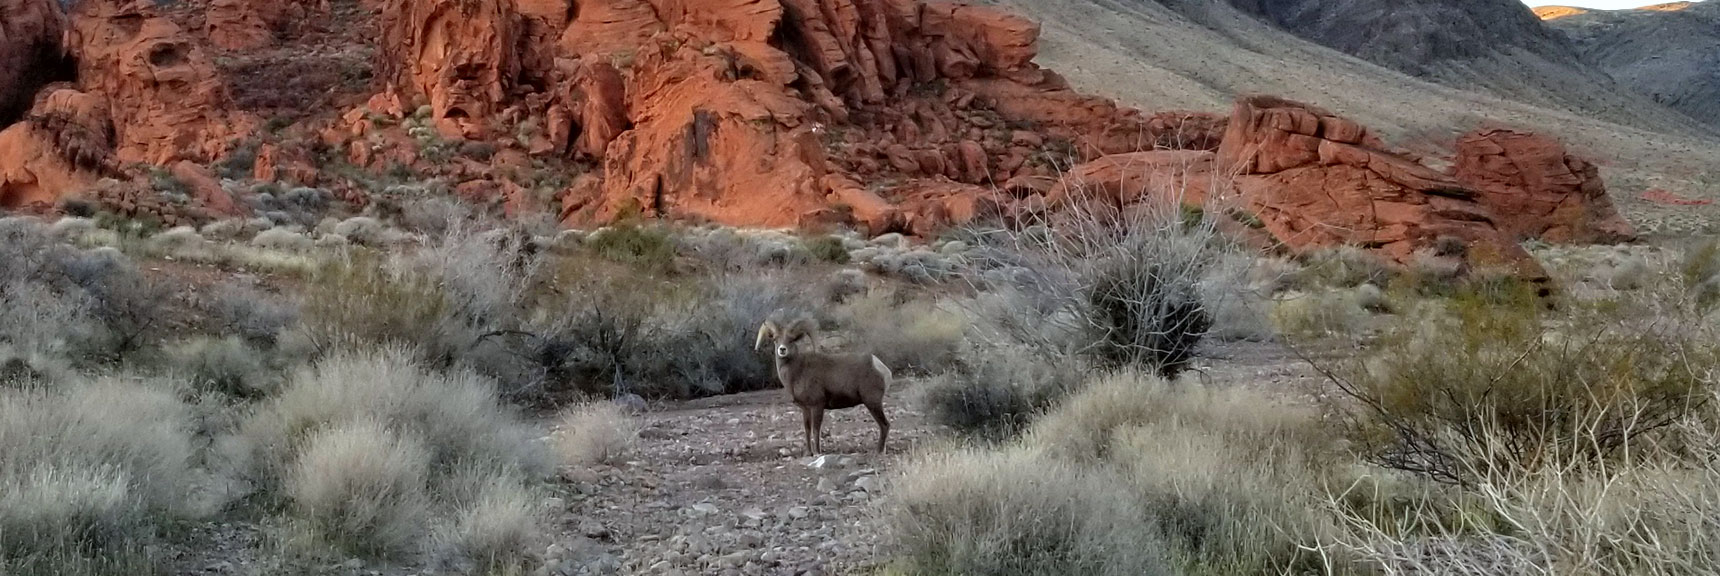 Bighorn Sheep Seen Near the West Entrance of Valley of Fire State Park, Nevada